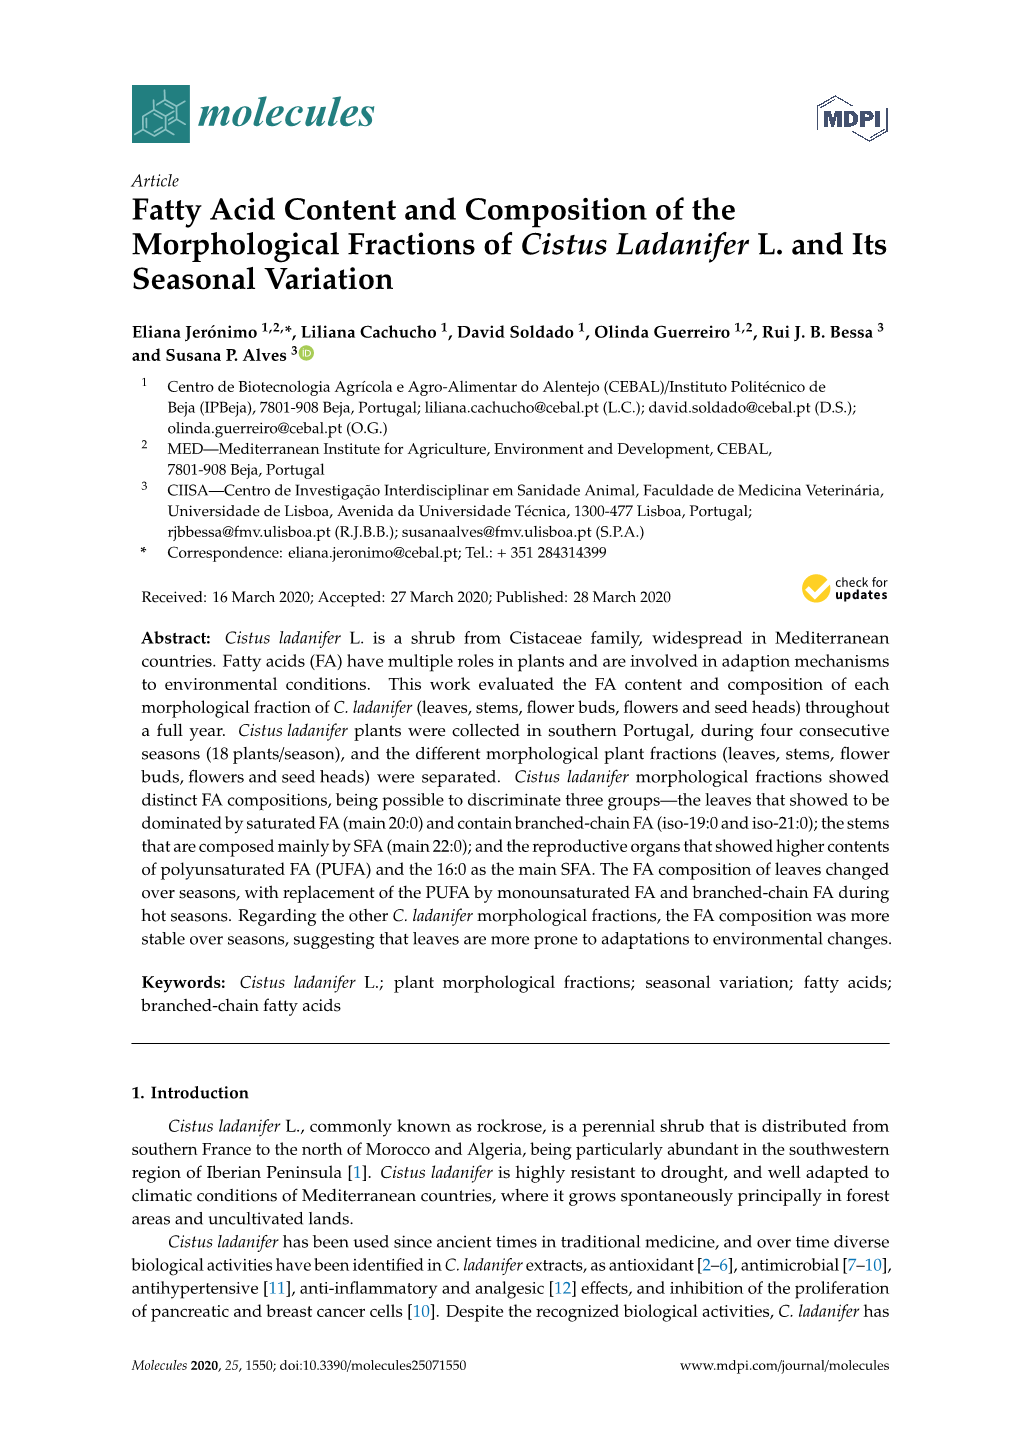 Fatty Acid Content and Composition of the Morphological Fractions of Cistus Ladanifer L